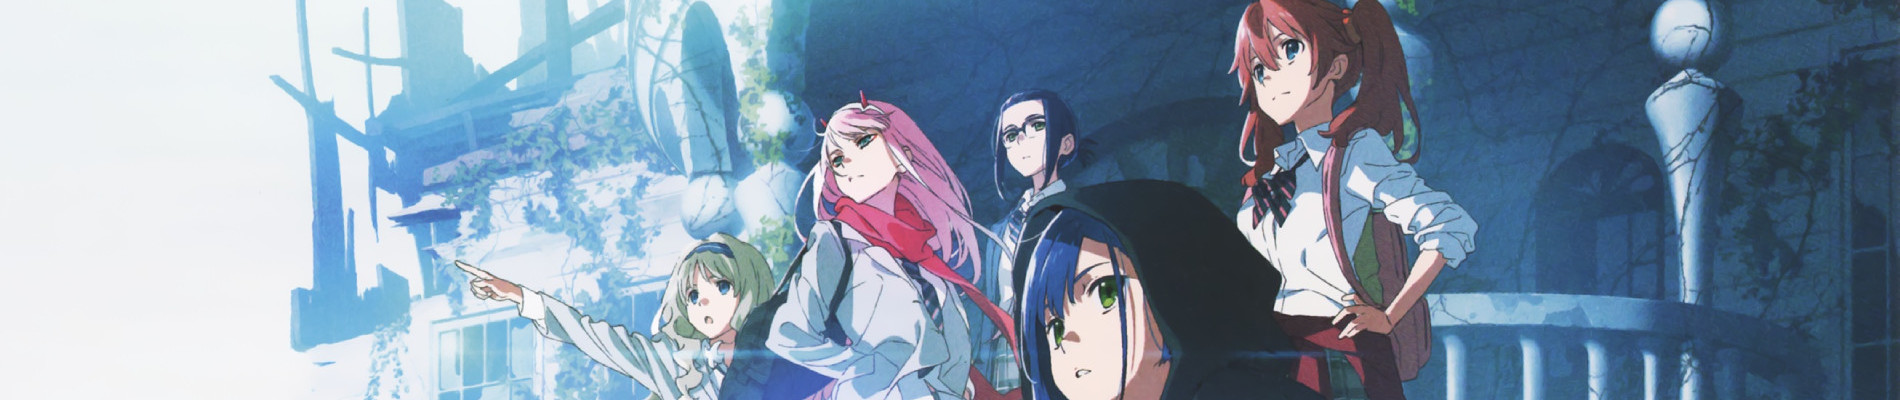 Banner for DARLING in the FRANXX